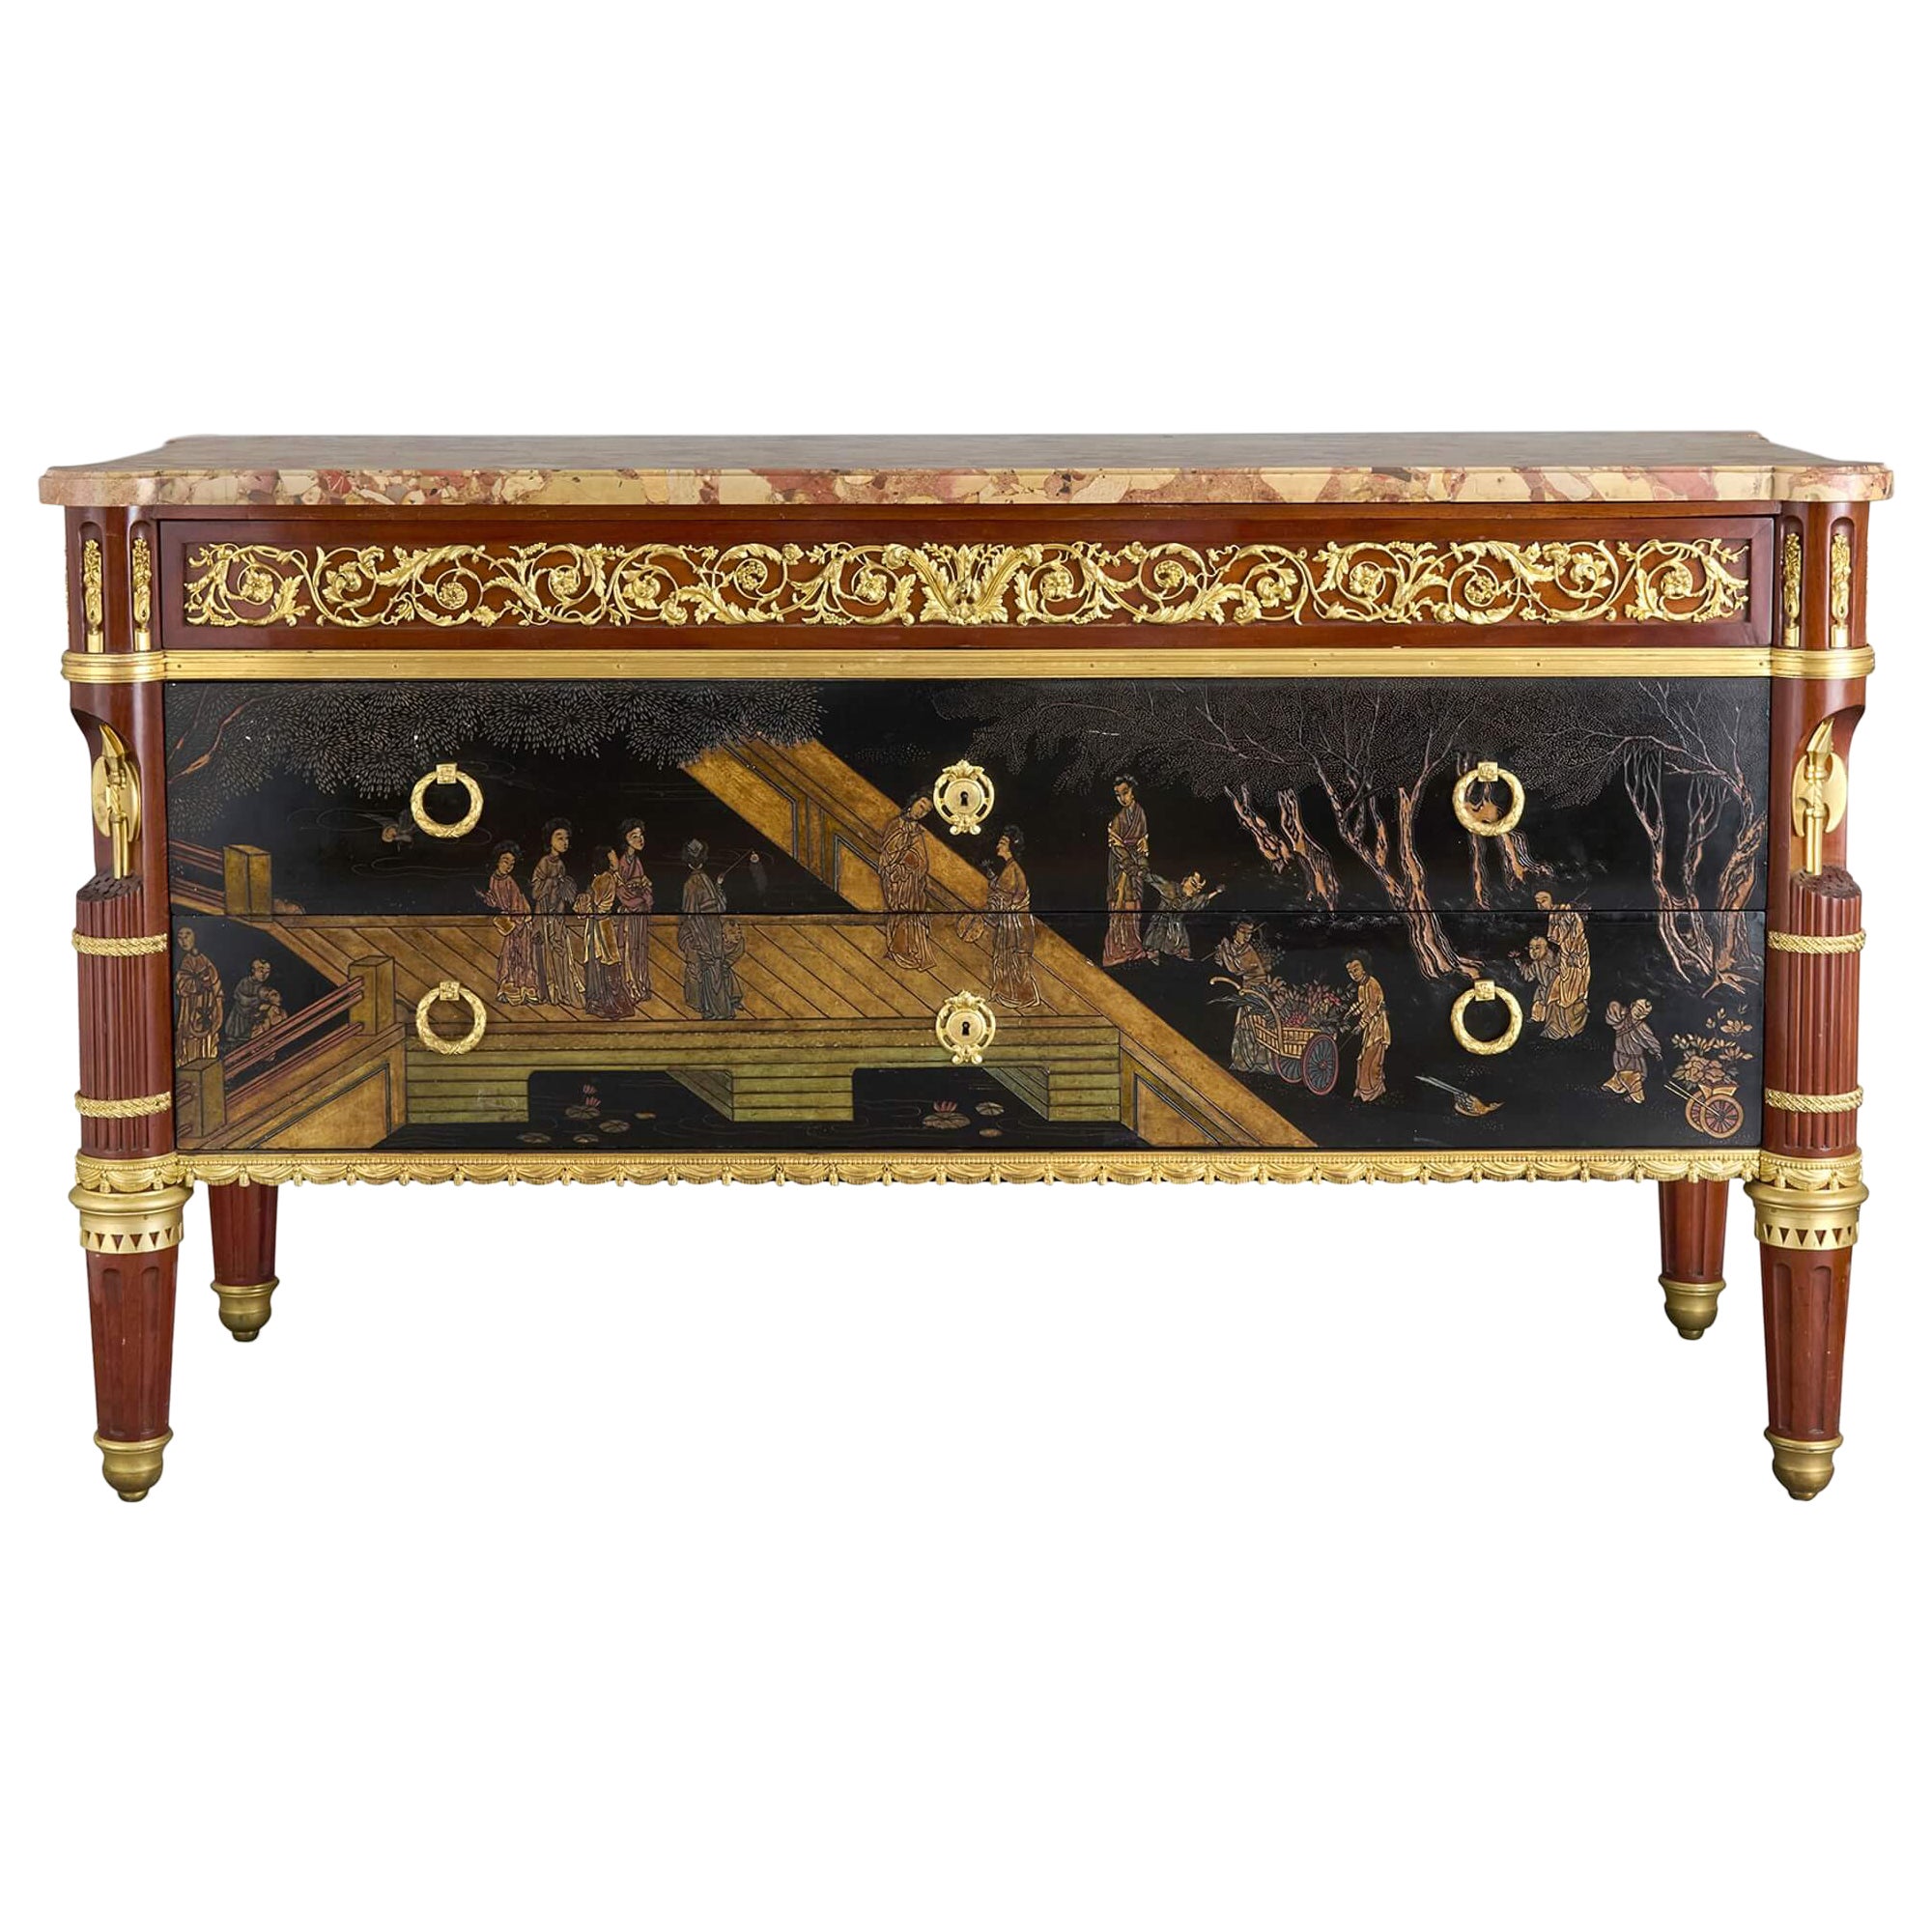 Antique Ormolu Mounted Mahogany and Chinese Lacquer Commode by Maison Forest